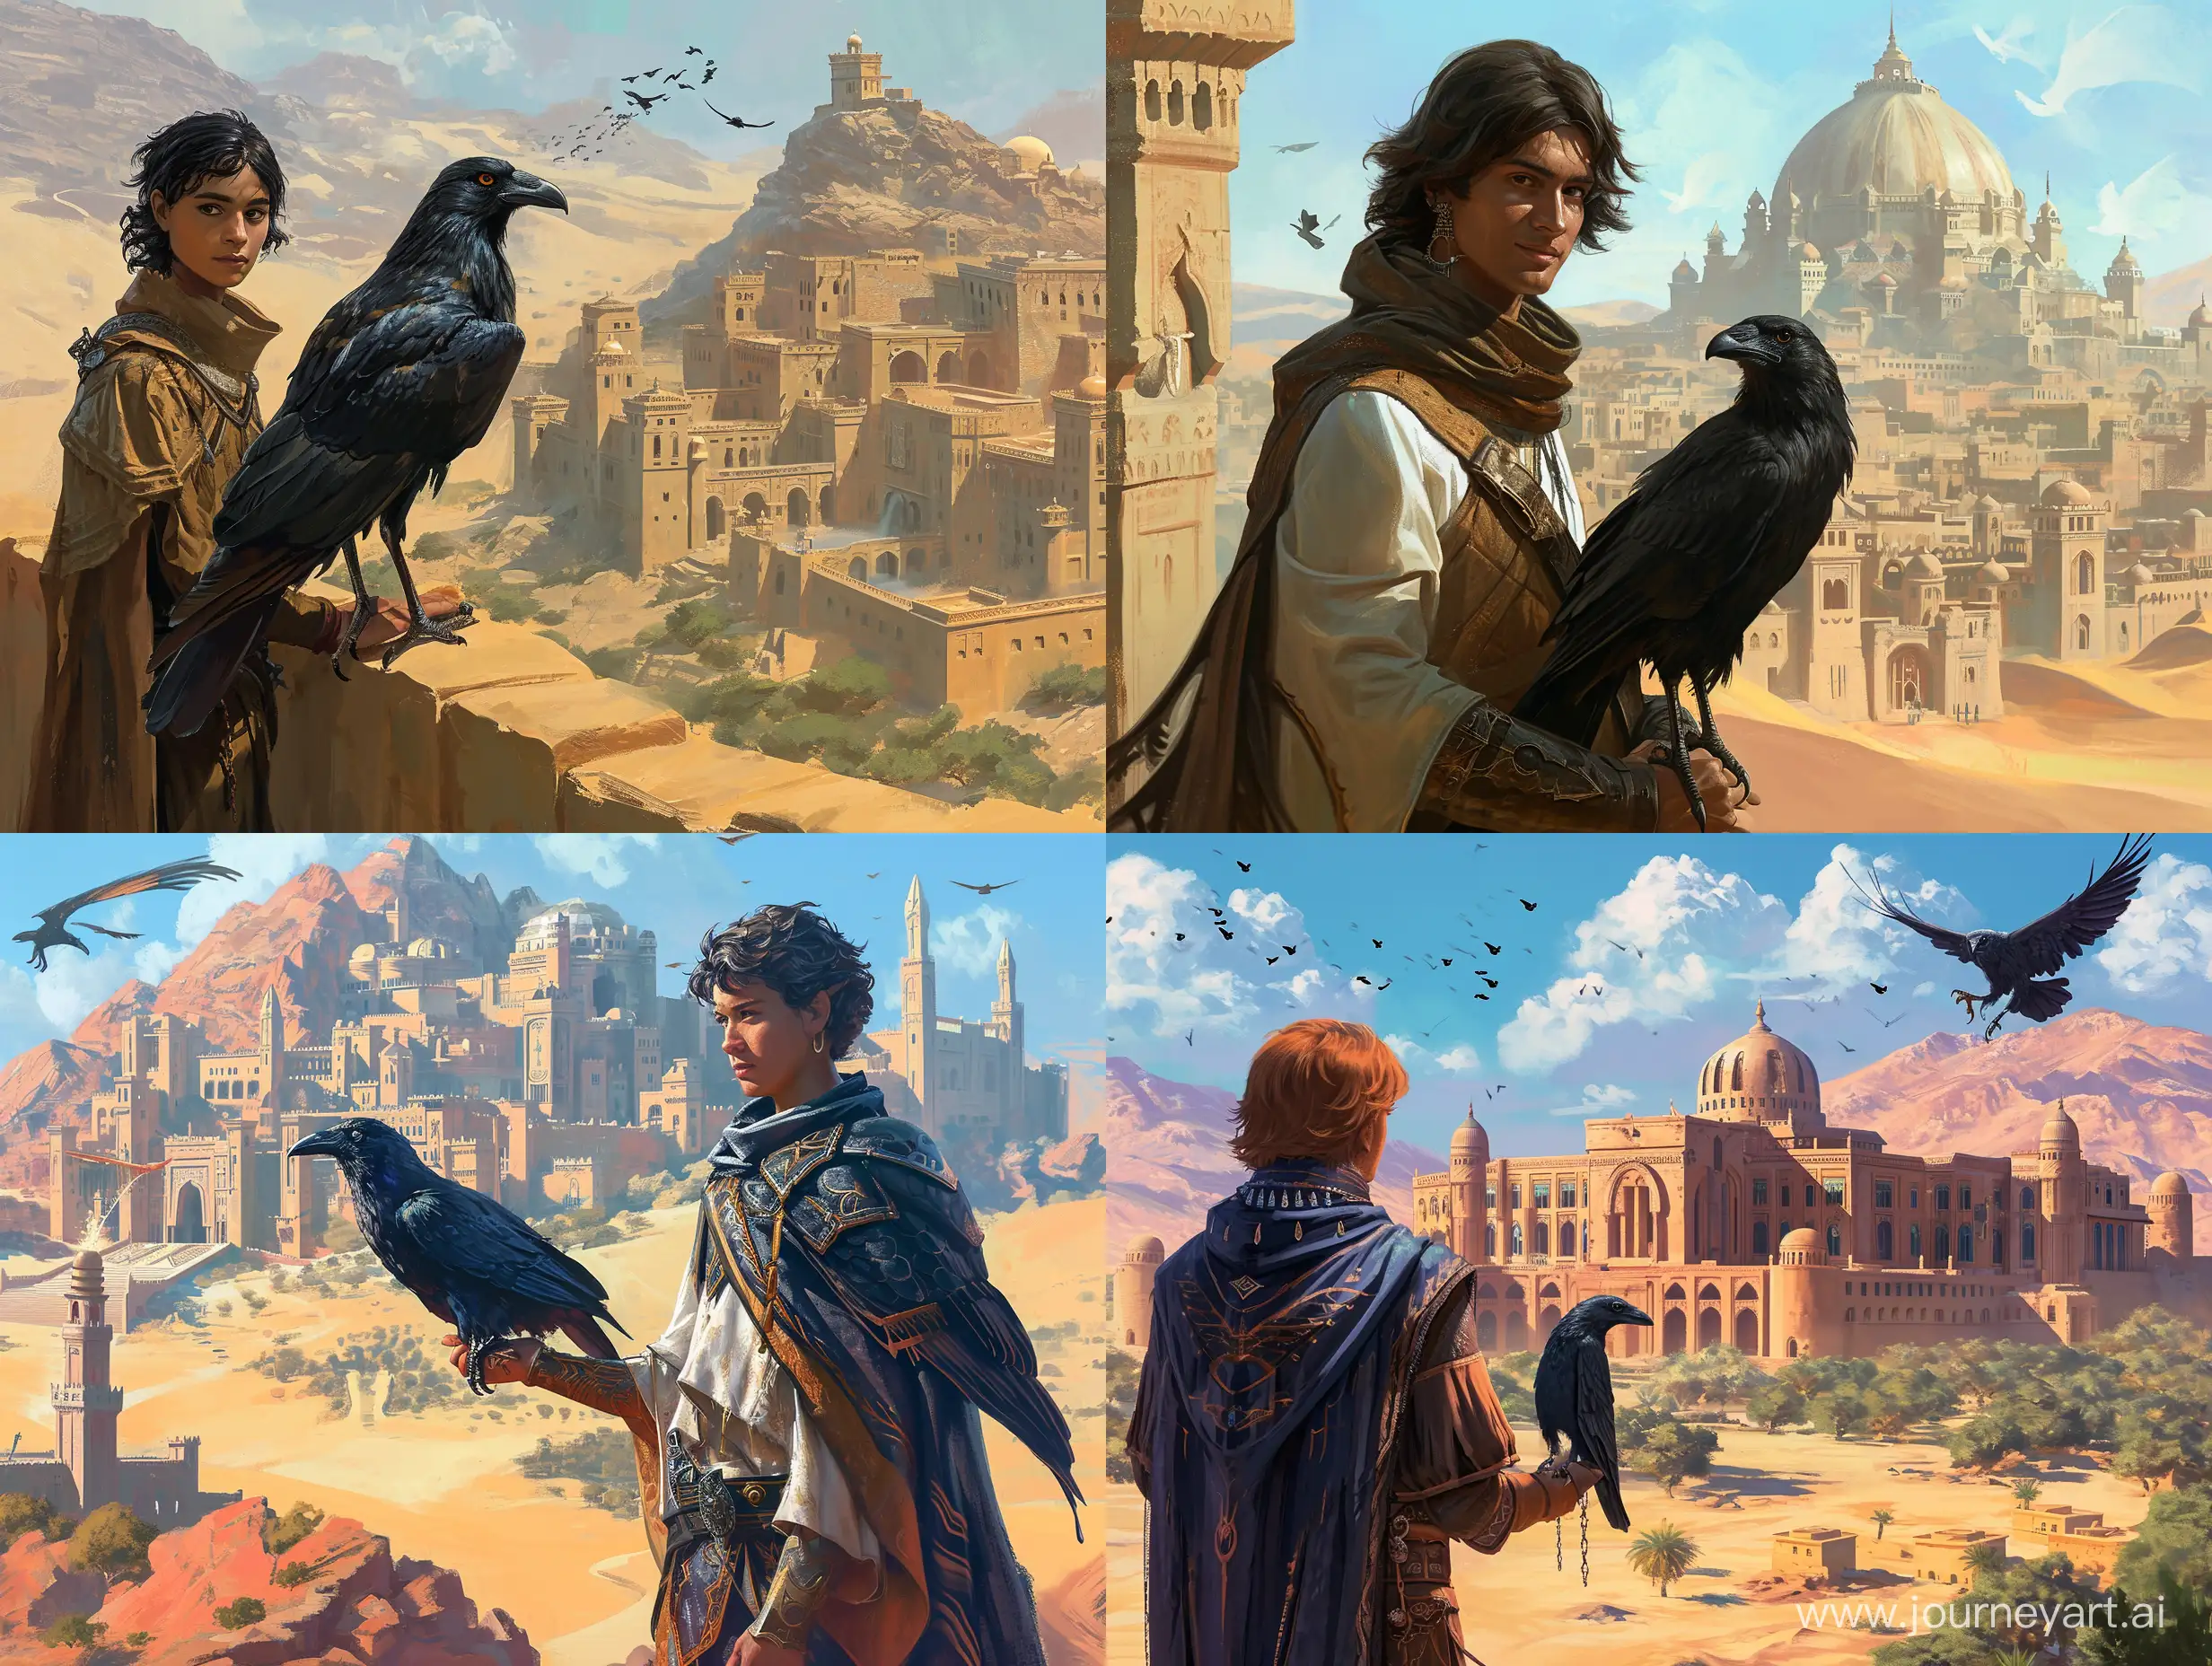 teenage wizard samsaran with a magical crow in front of a university of a rich city in the middle of the desert, high resolution, fantasy world, dungeons and dragons